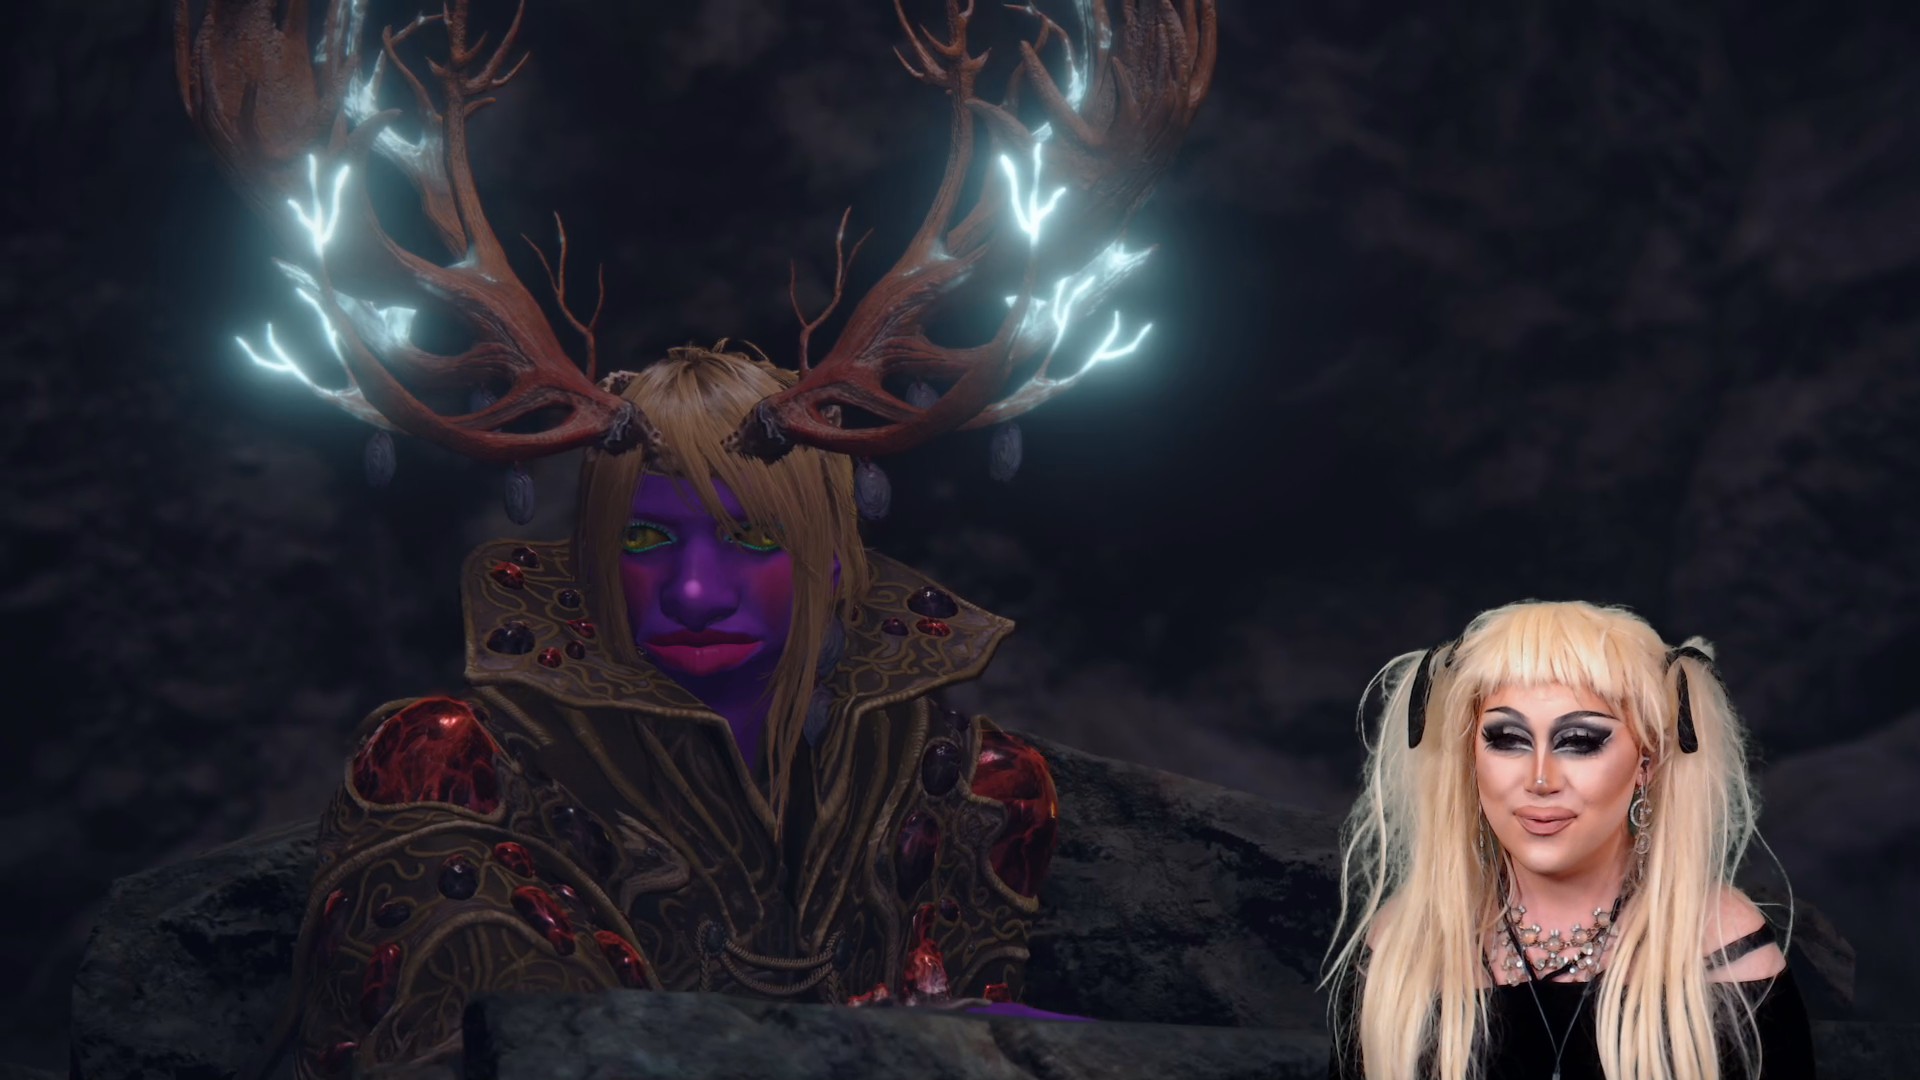 Forget Elden Lord, this Elden Ring streamer is the self-proclaimed Bimbo Mage of the Lands Between